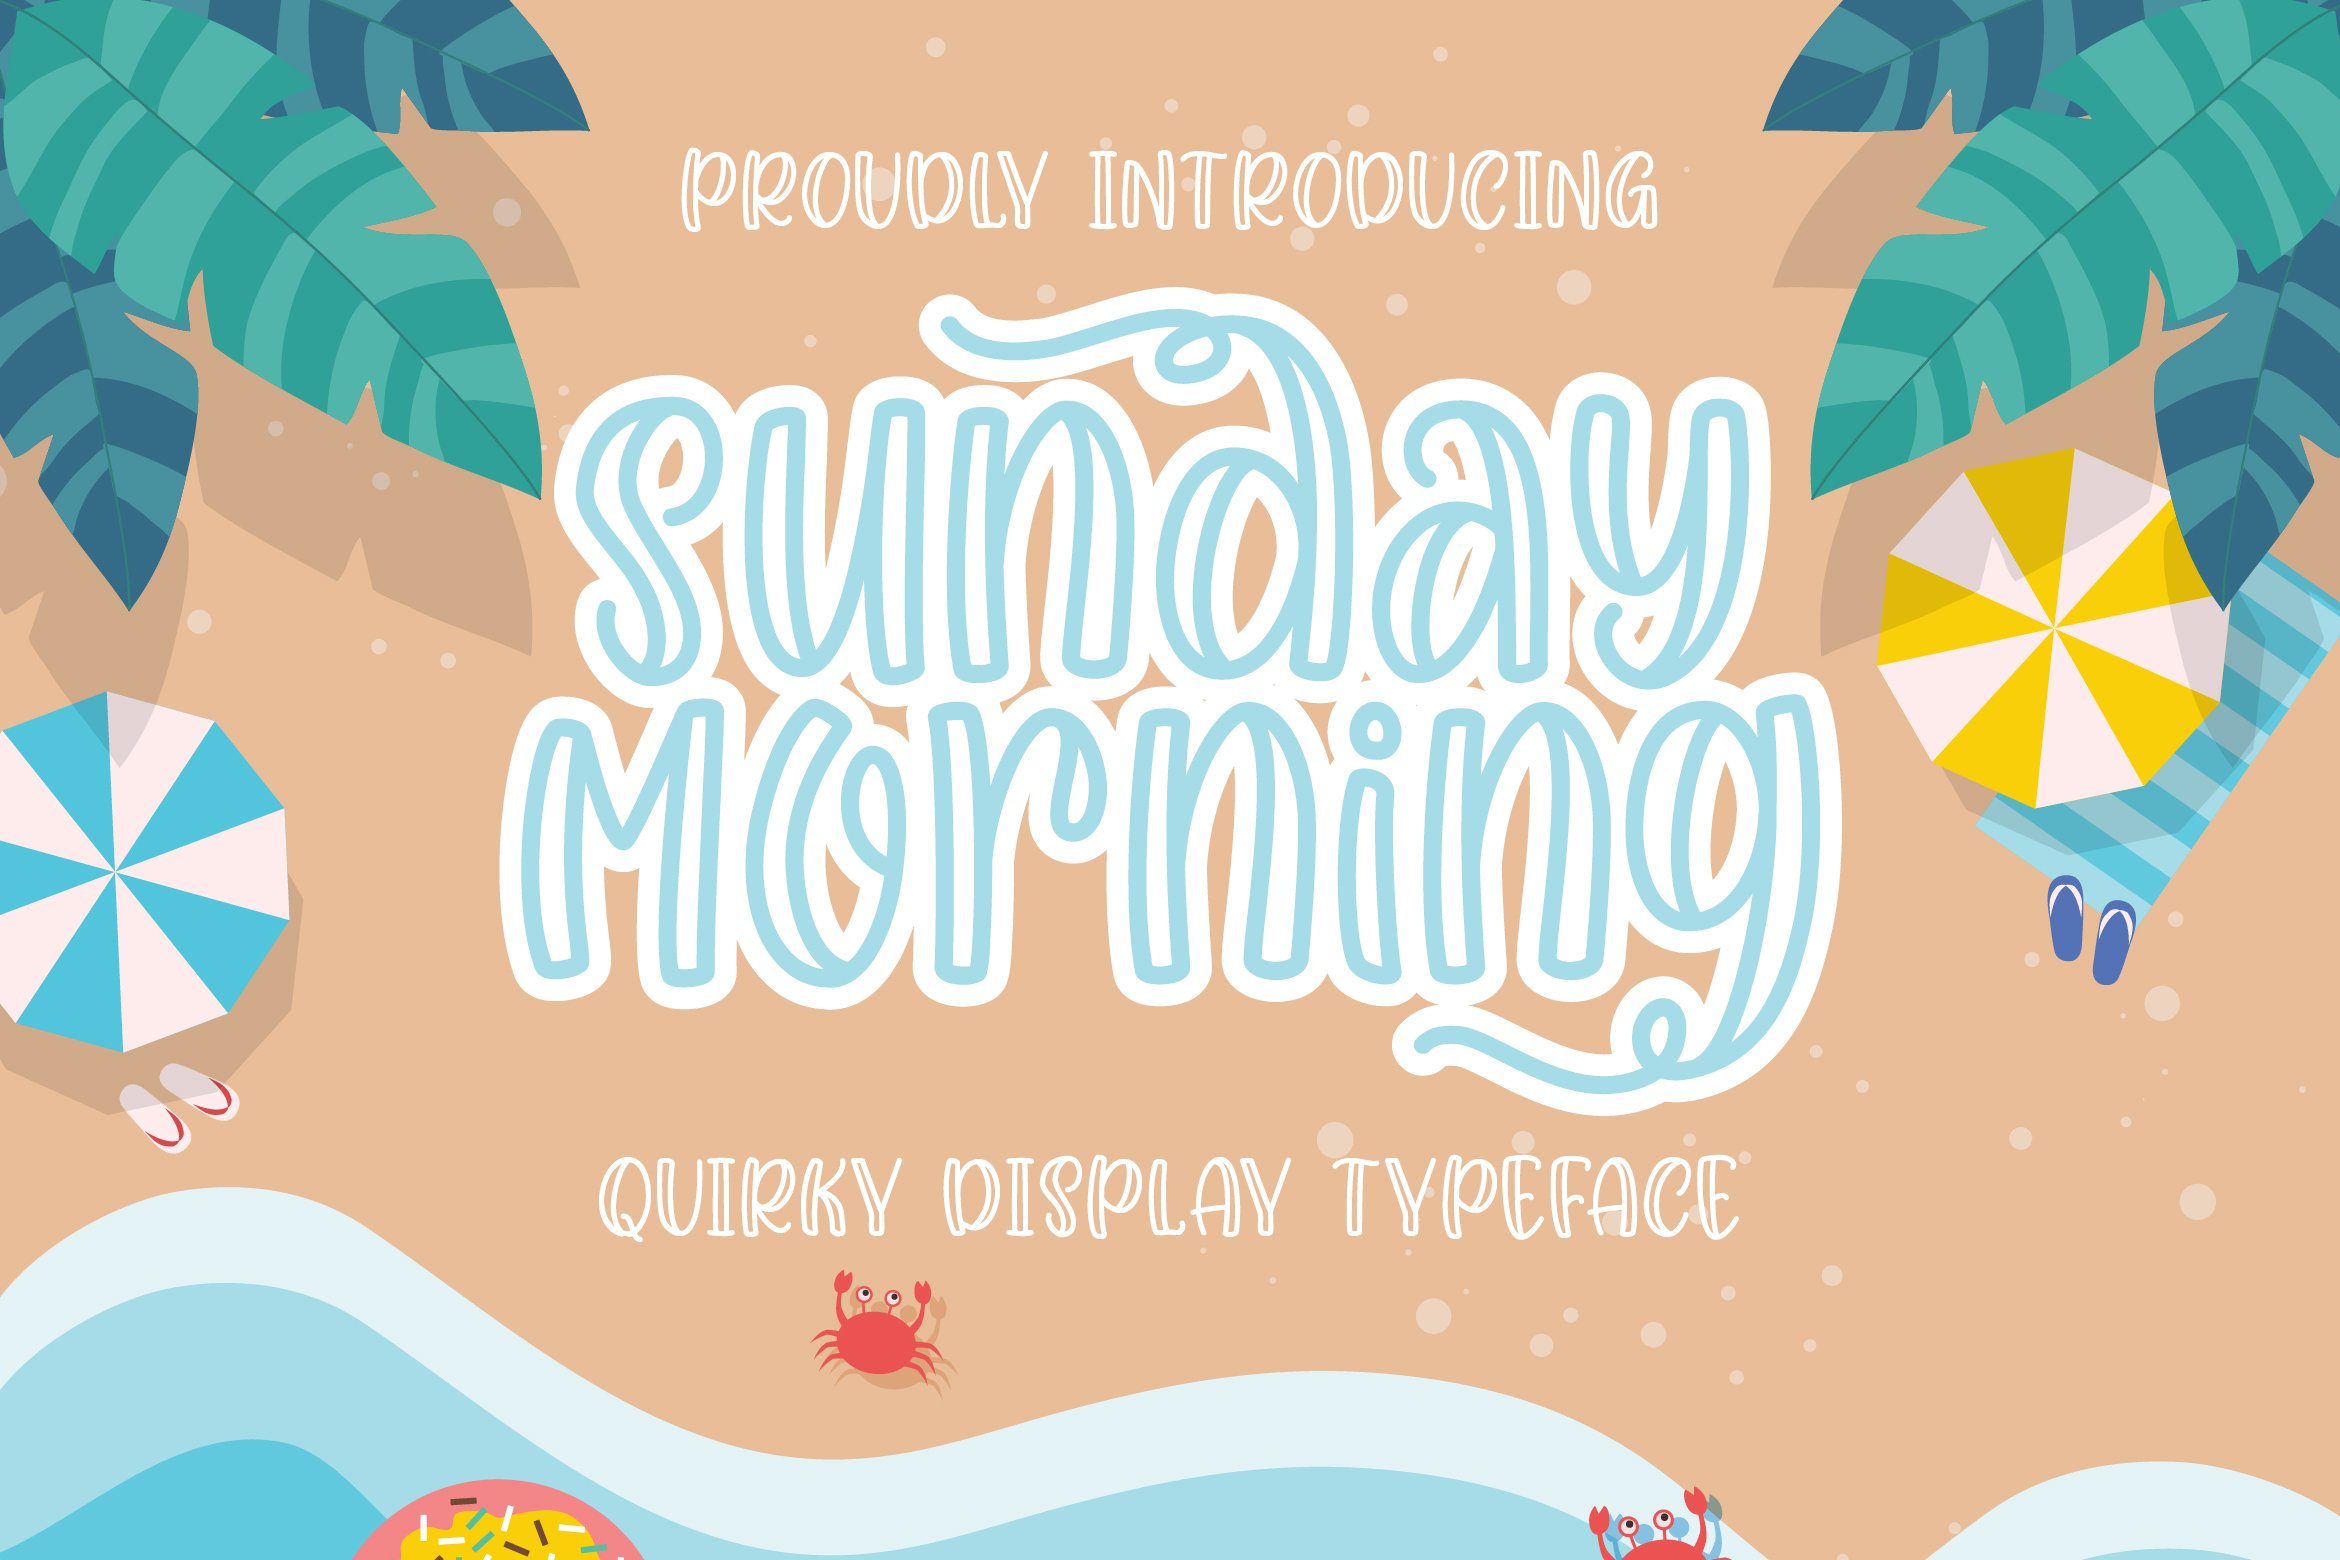 Sunday Morning Quirky Business Font cover image.